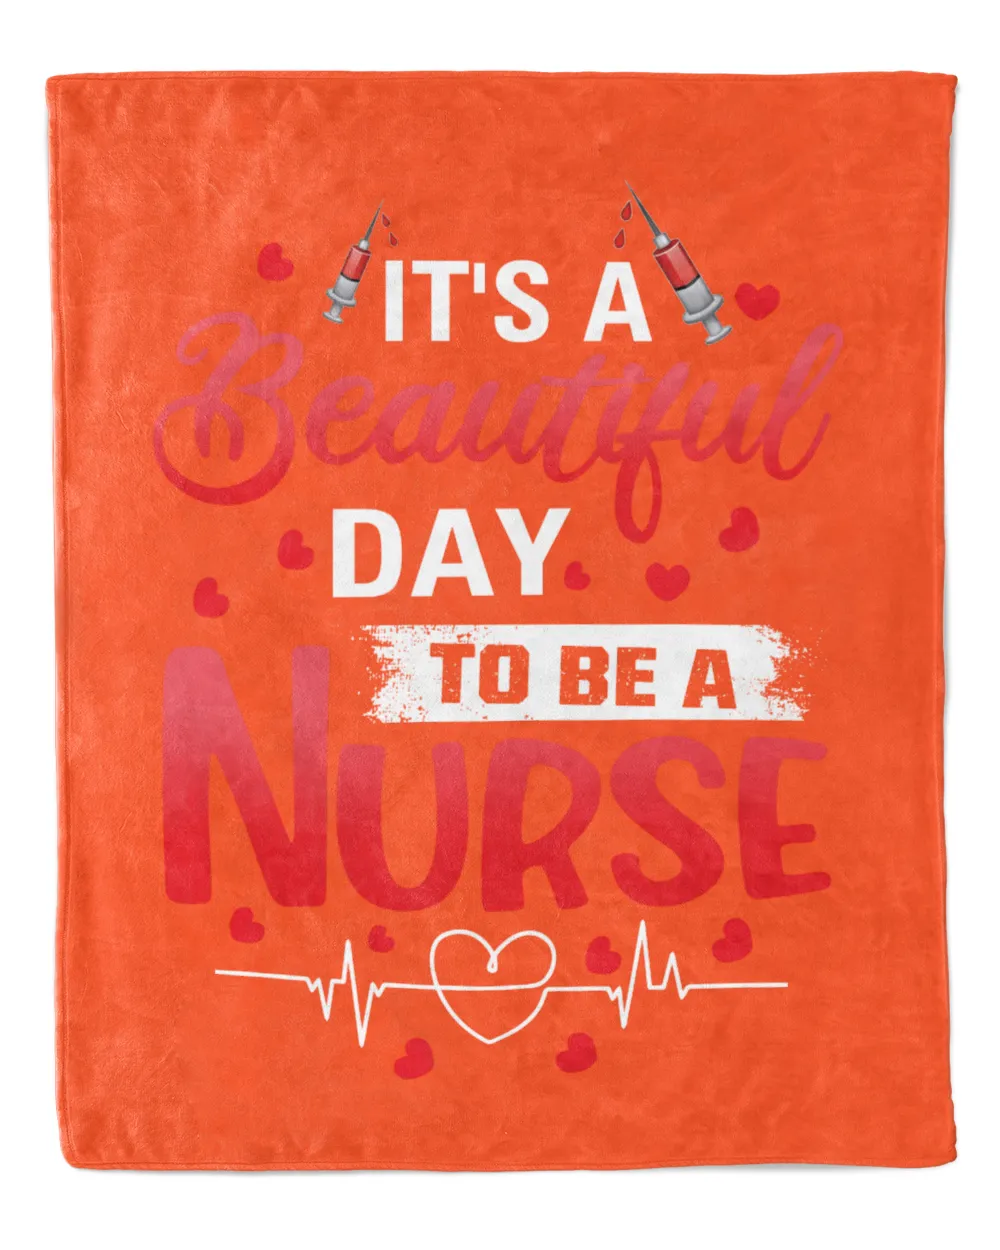 It's A Beautiful Day To be A Nurse